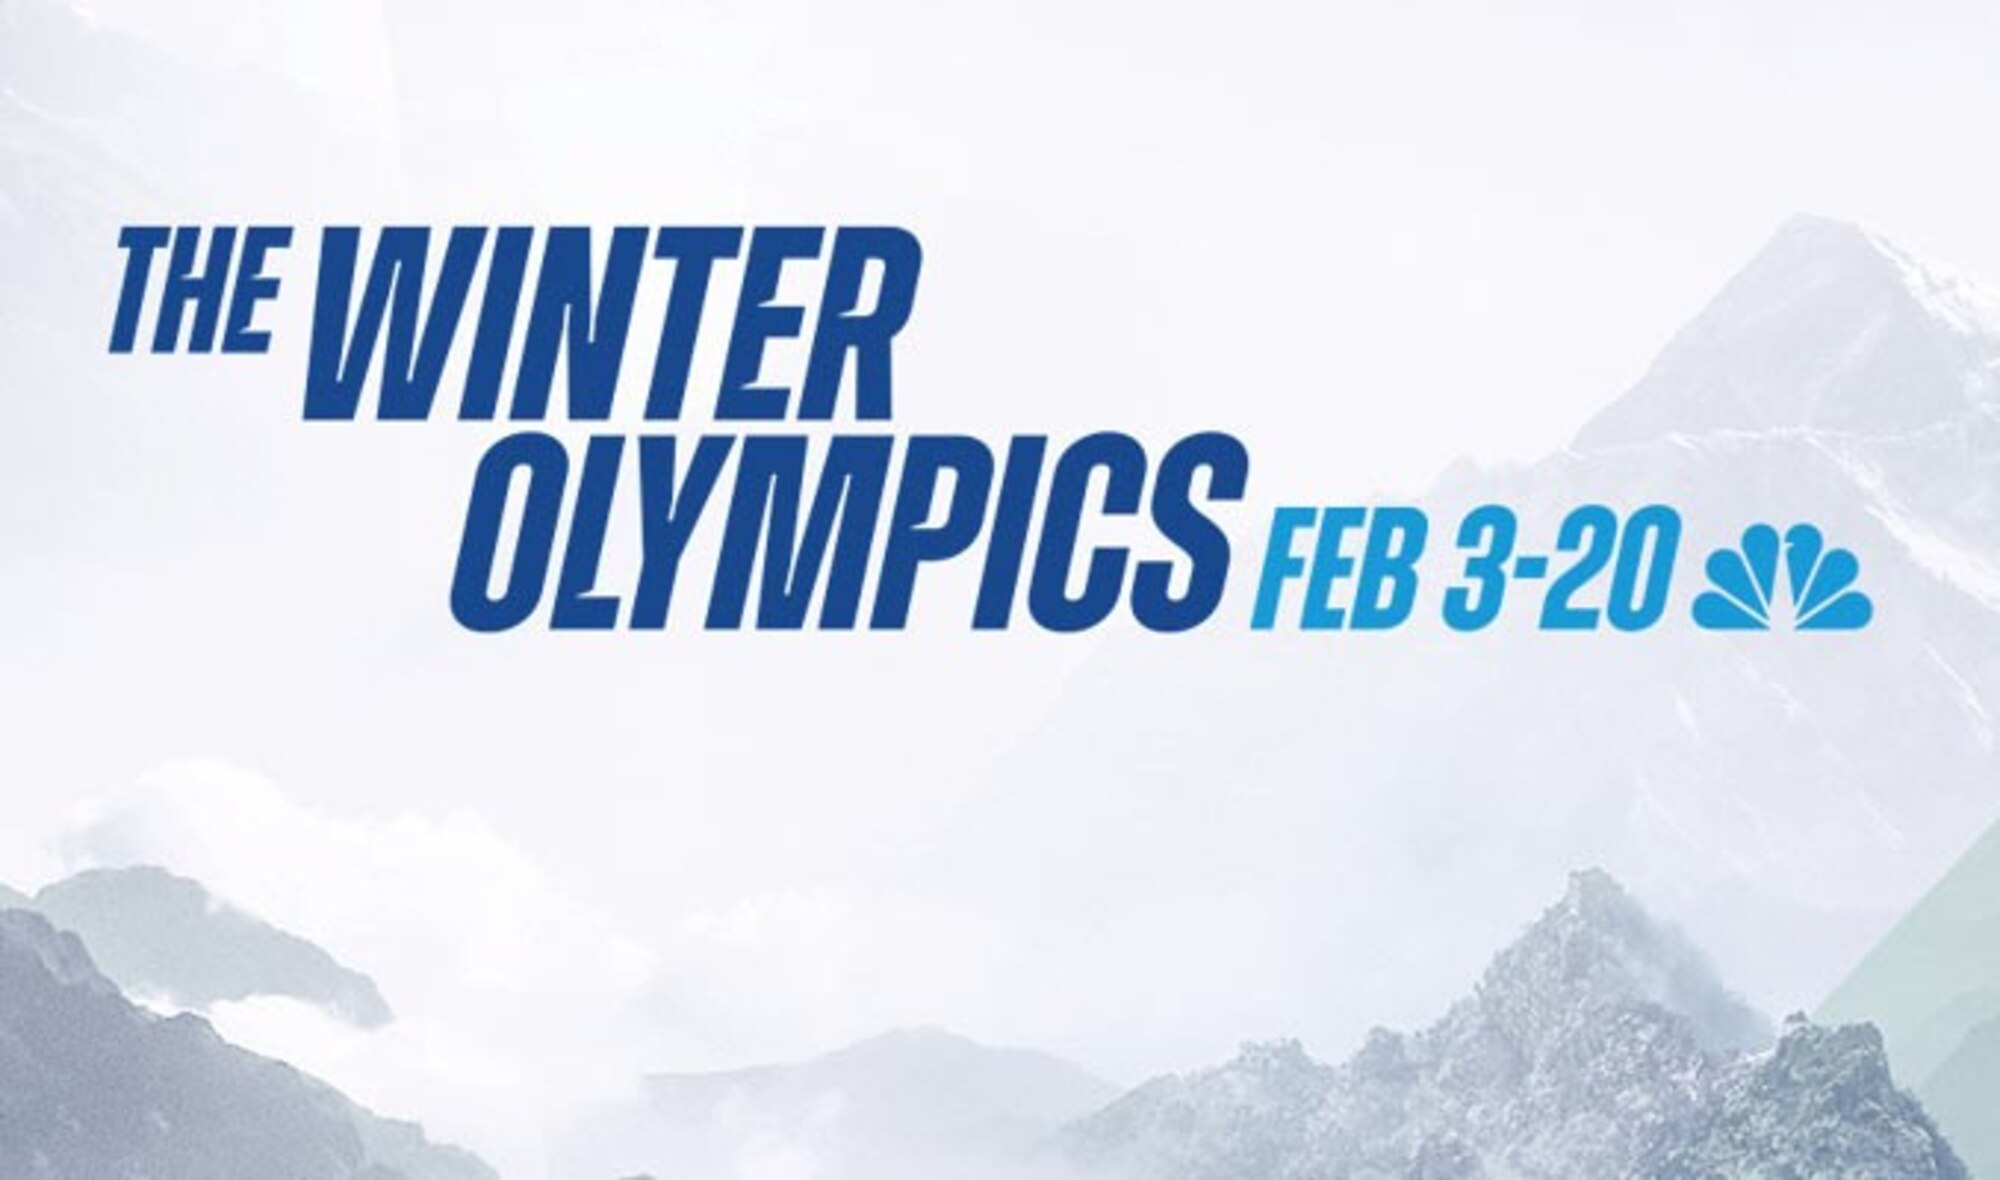 The Winter Olympics Feb. 3-20 appear over an illustration of white-colored clouds and gray-colored mountains.